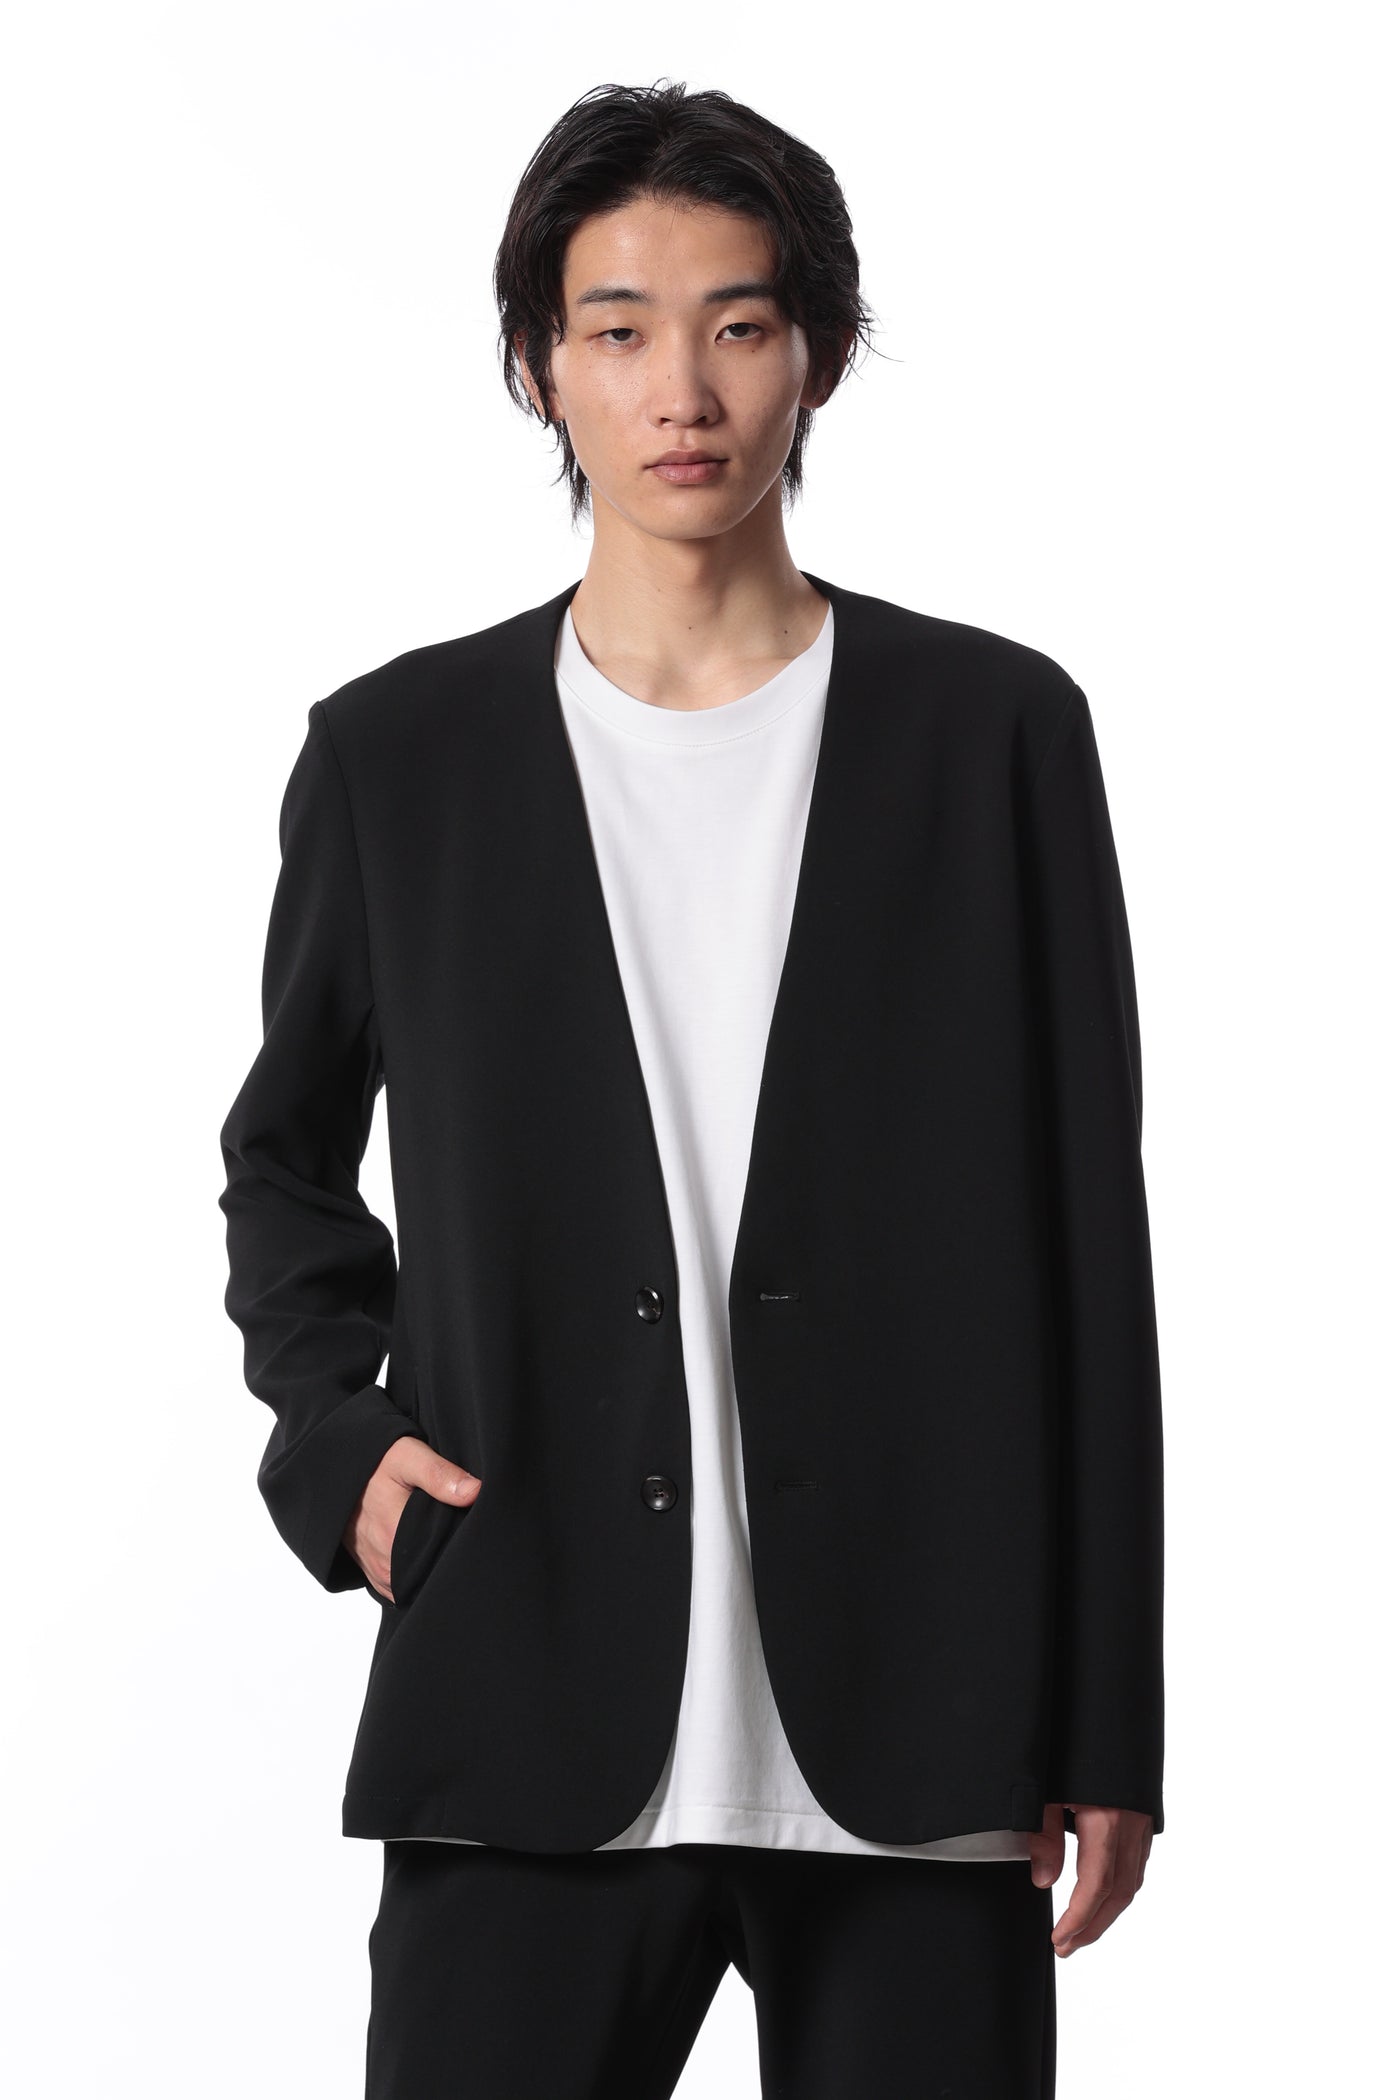 AG41-037 Polyester stretch double cross collarless jacket